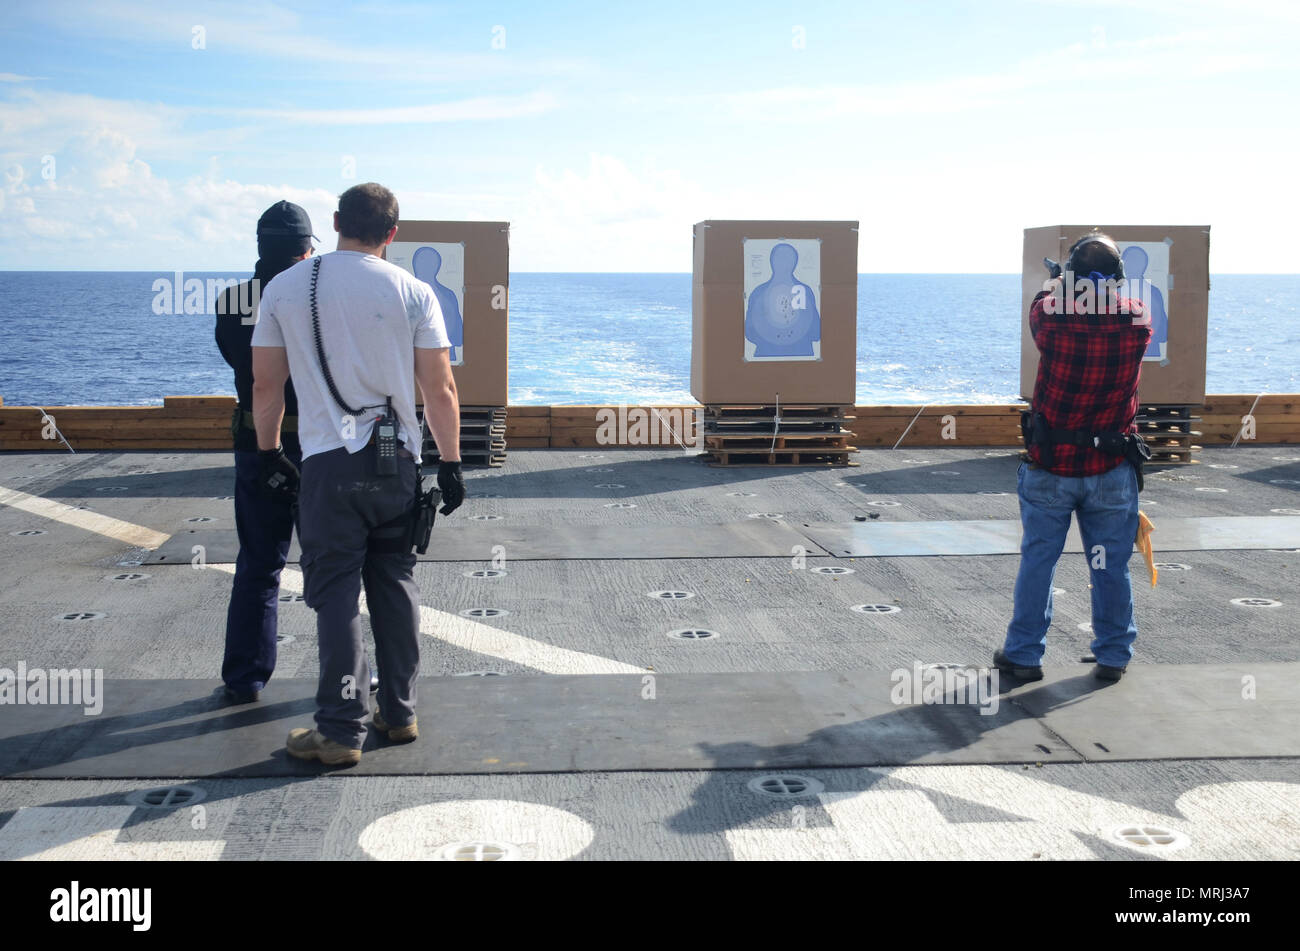 170621-N-WJ640-023 PACIFIC OCEAN (June 21, 2017) Civilian Mariners conduct live fire arms training onboard the flight deck of USNS Sacagawea (T-AKE 2) during Koa Moana 17, June 21. The Koa Moana 17 (Ocean Warrior) exercise is designed to improve interoperability; enhance military-to-military relations and expose Marine Corps forces to different types of terrain for familiarity in the event of a natural disaster or crisis in the region. (U.S. Navy photo by Mass Communication Specialist 3rd Class Madailein Abbott) Stock Photo